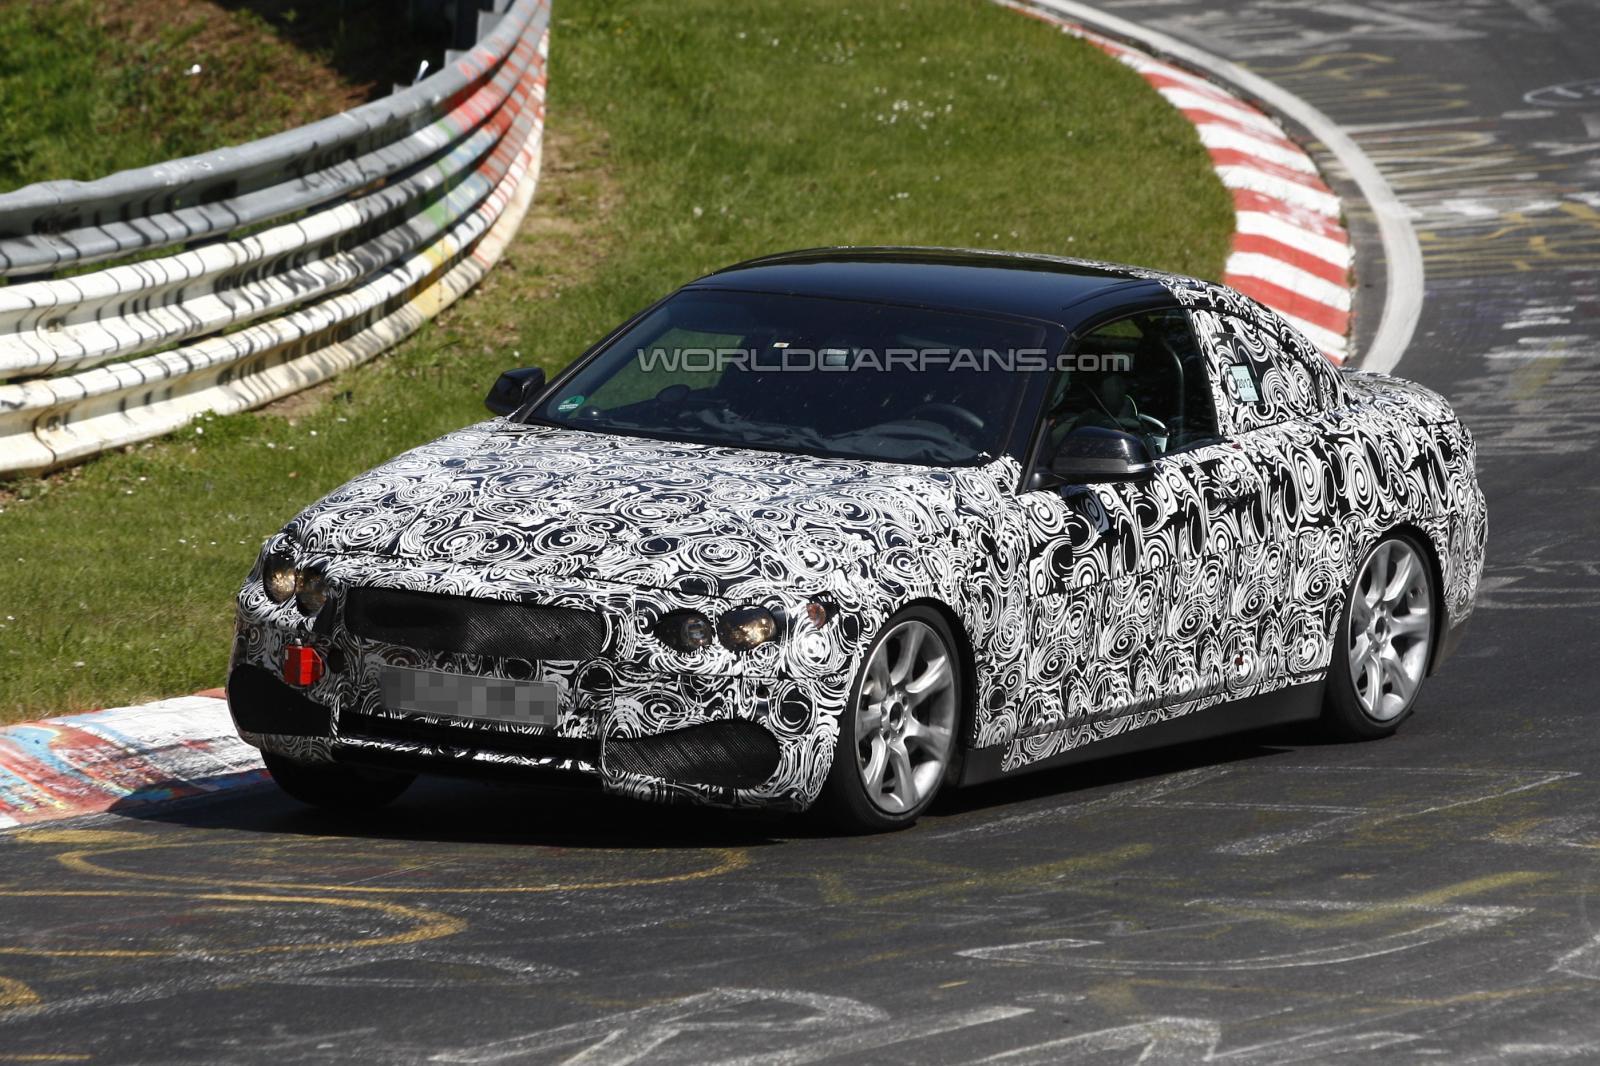 Video: BMW 4 Series Cabriolet spied at the Nurburgring